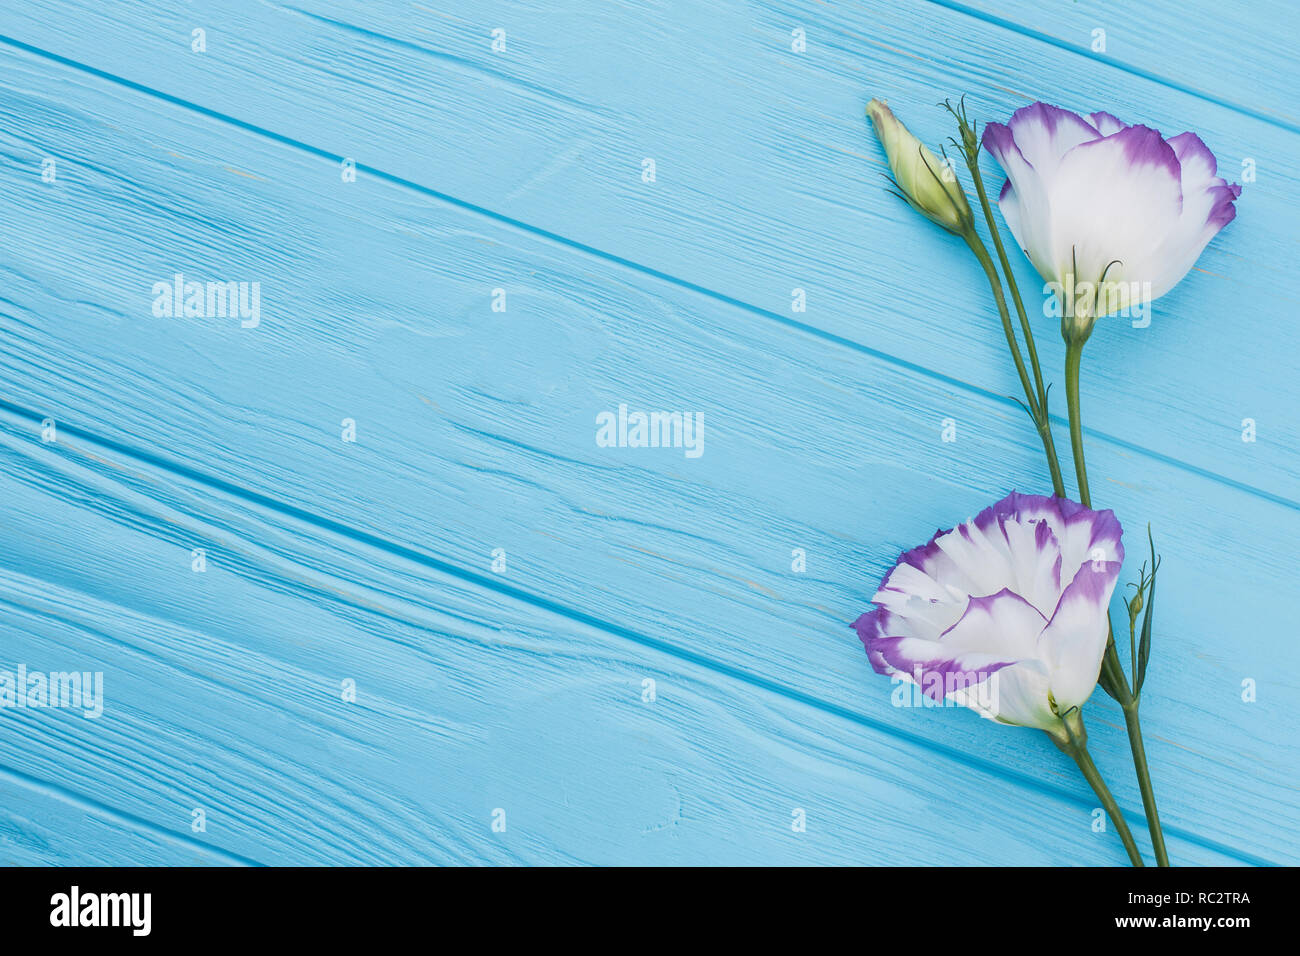 Purple lisianthus or eustoma flowers on blue wood background. Free space for text, copyspace. Stock Photo